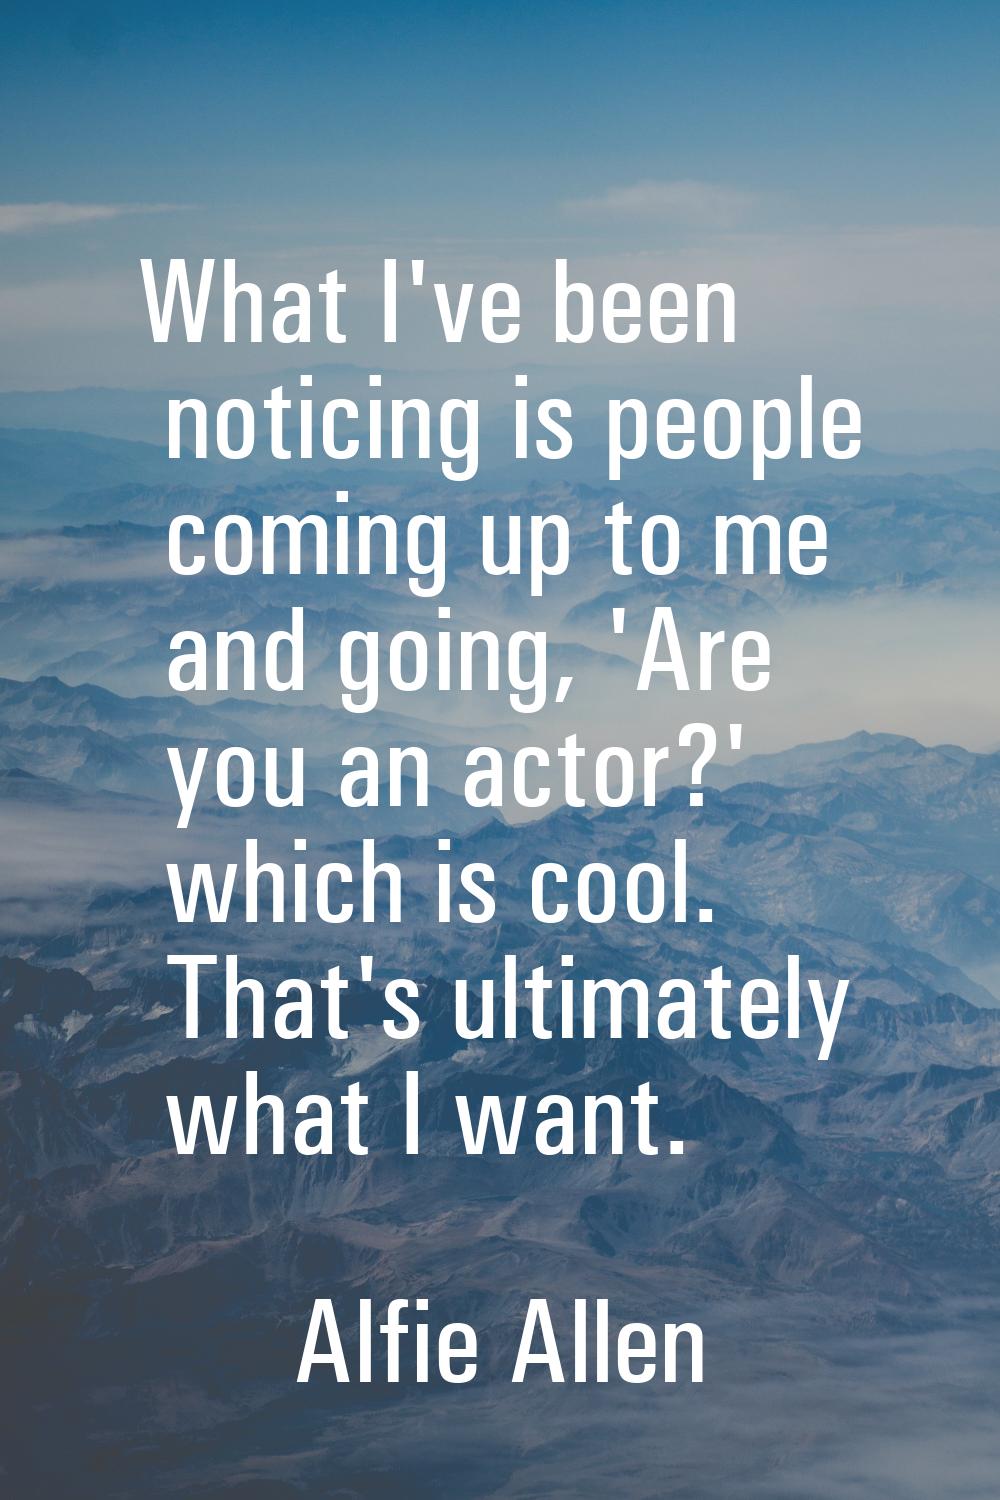 What I've been noticing is people coming up to me and going, 'Are you an actor?' which is cool. Tha